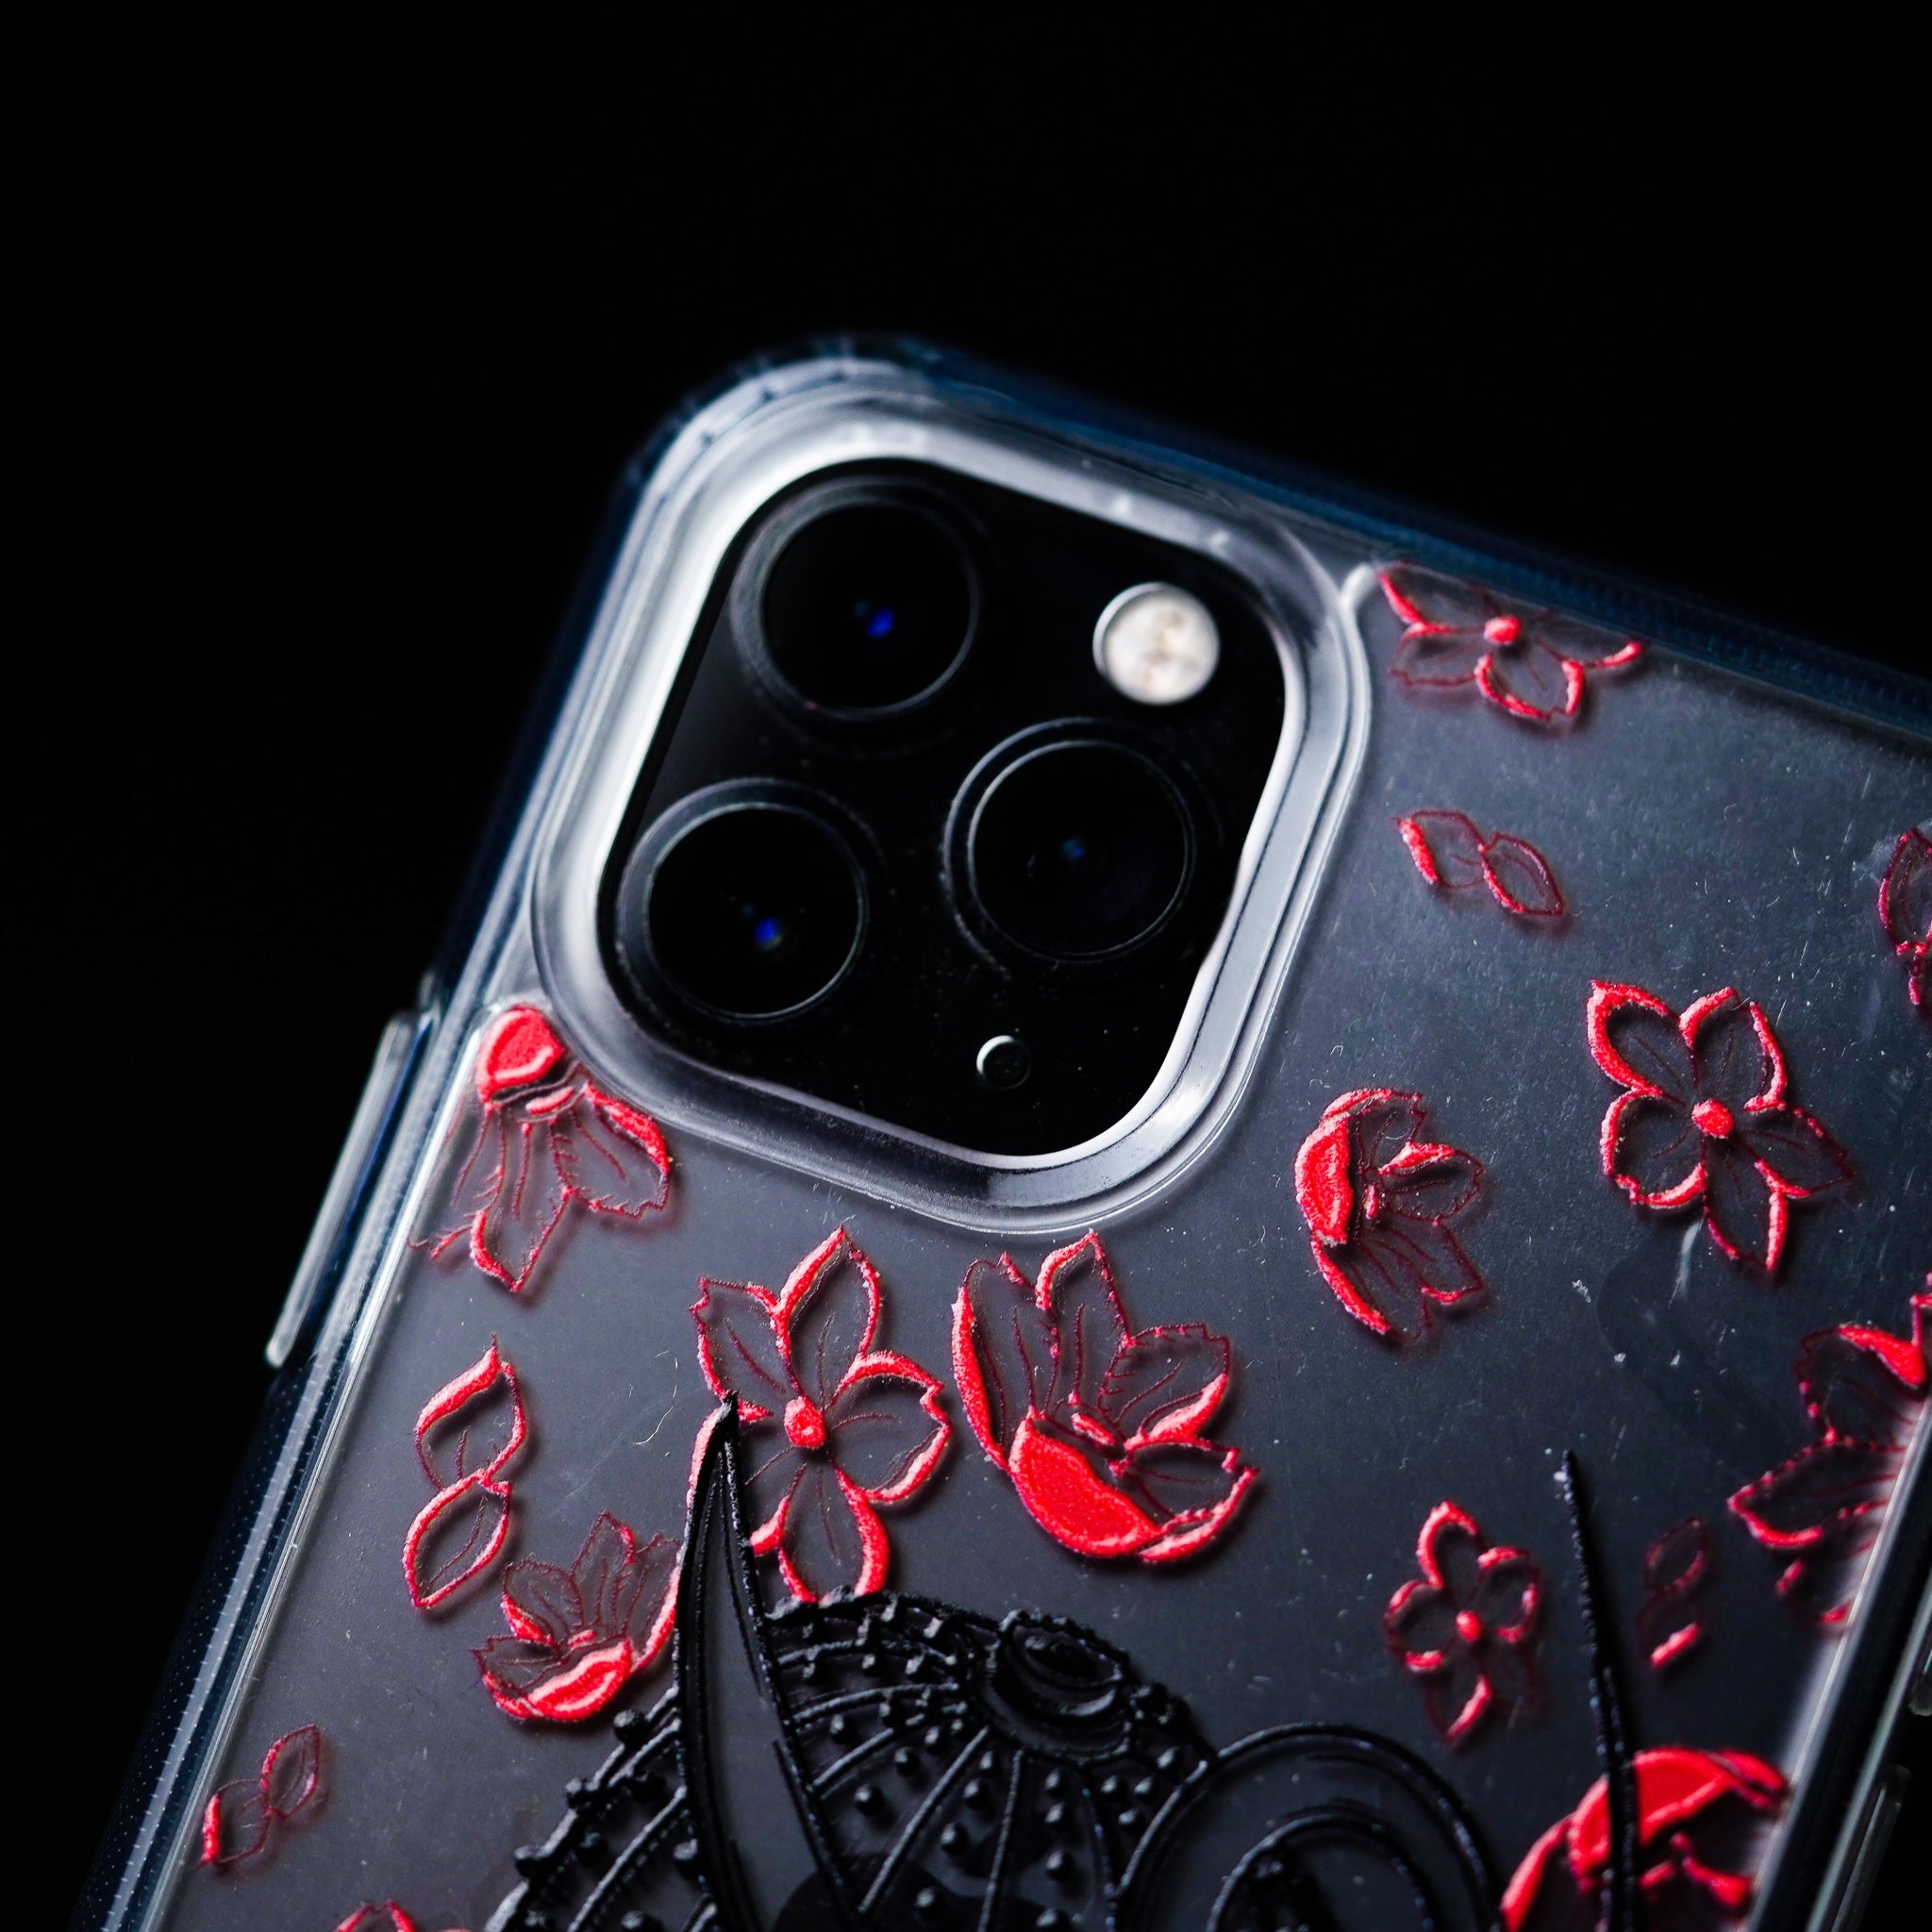 SKULZ Clear iPhone Case